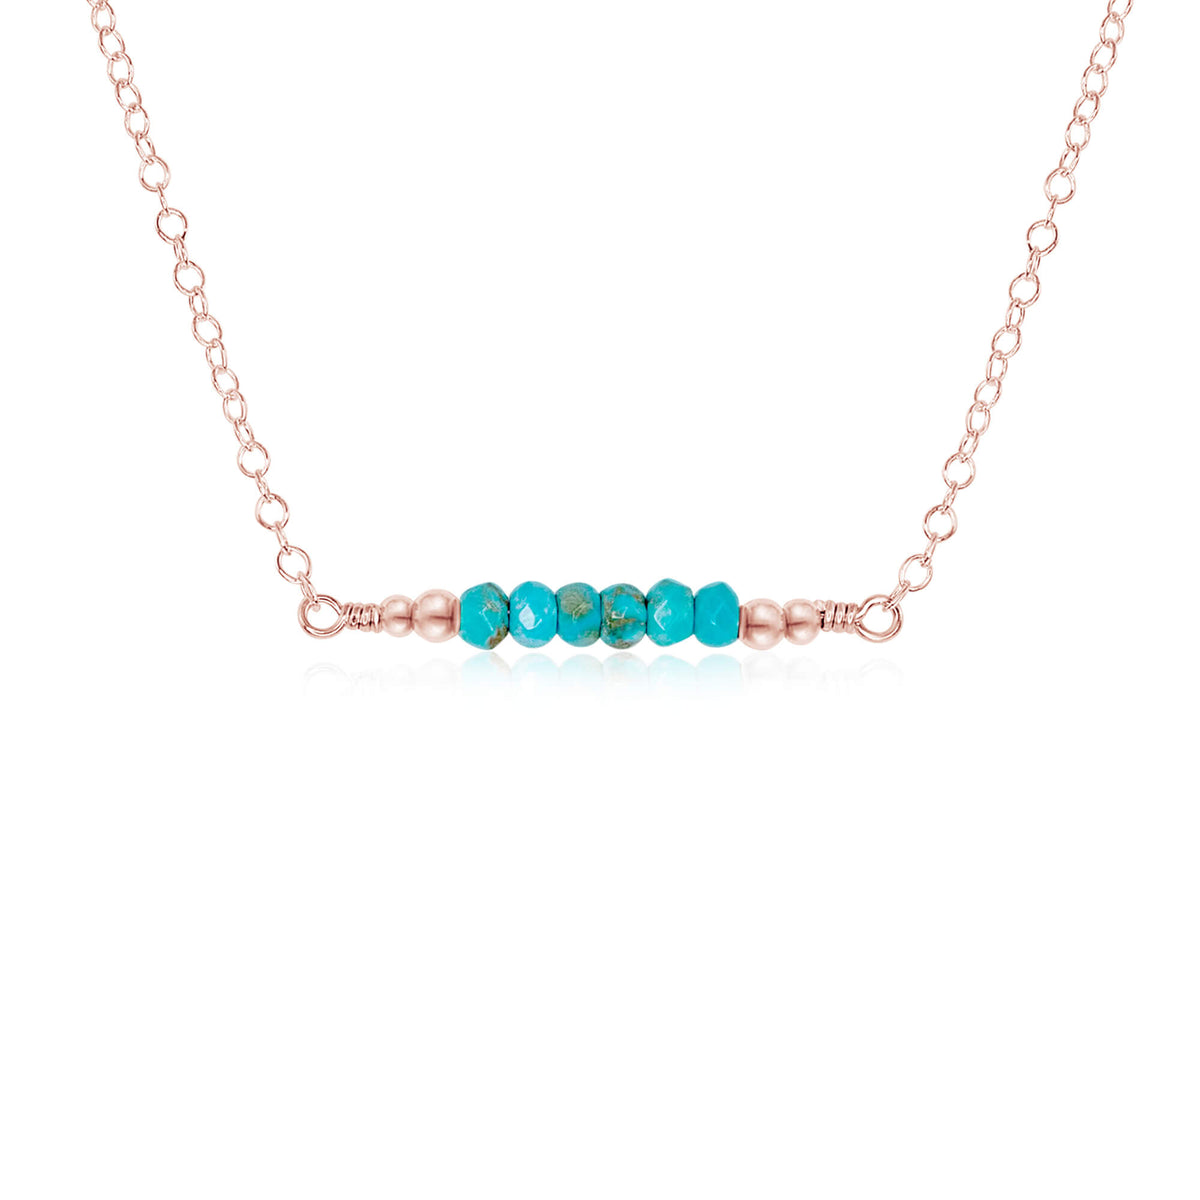 Faceted Bead Bar Necklace - Turquoise - 14K Rose Gold Fill - Luna Tide Handmade Jewellery